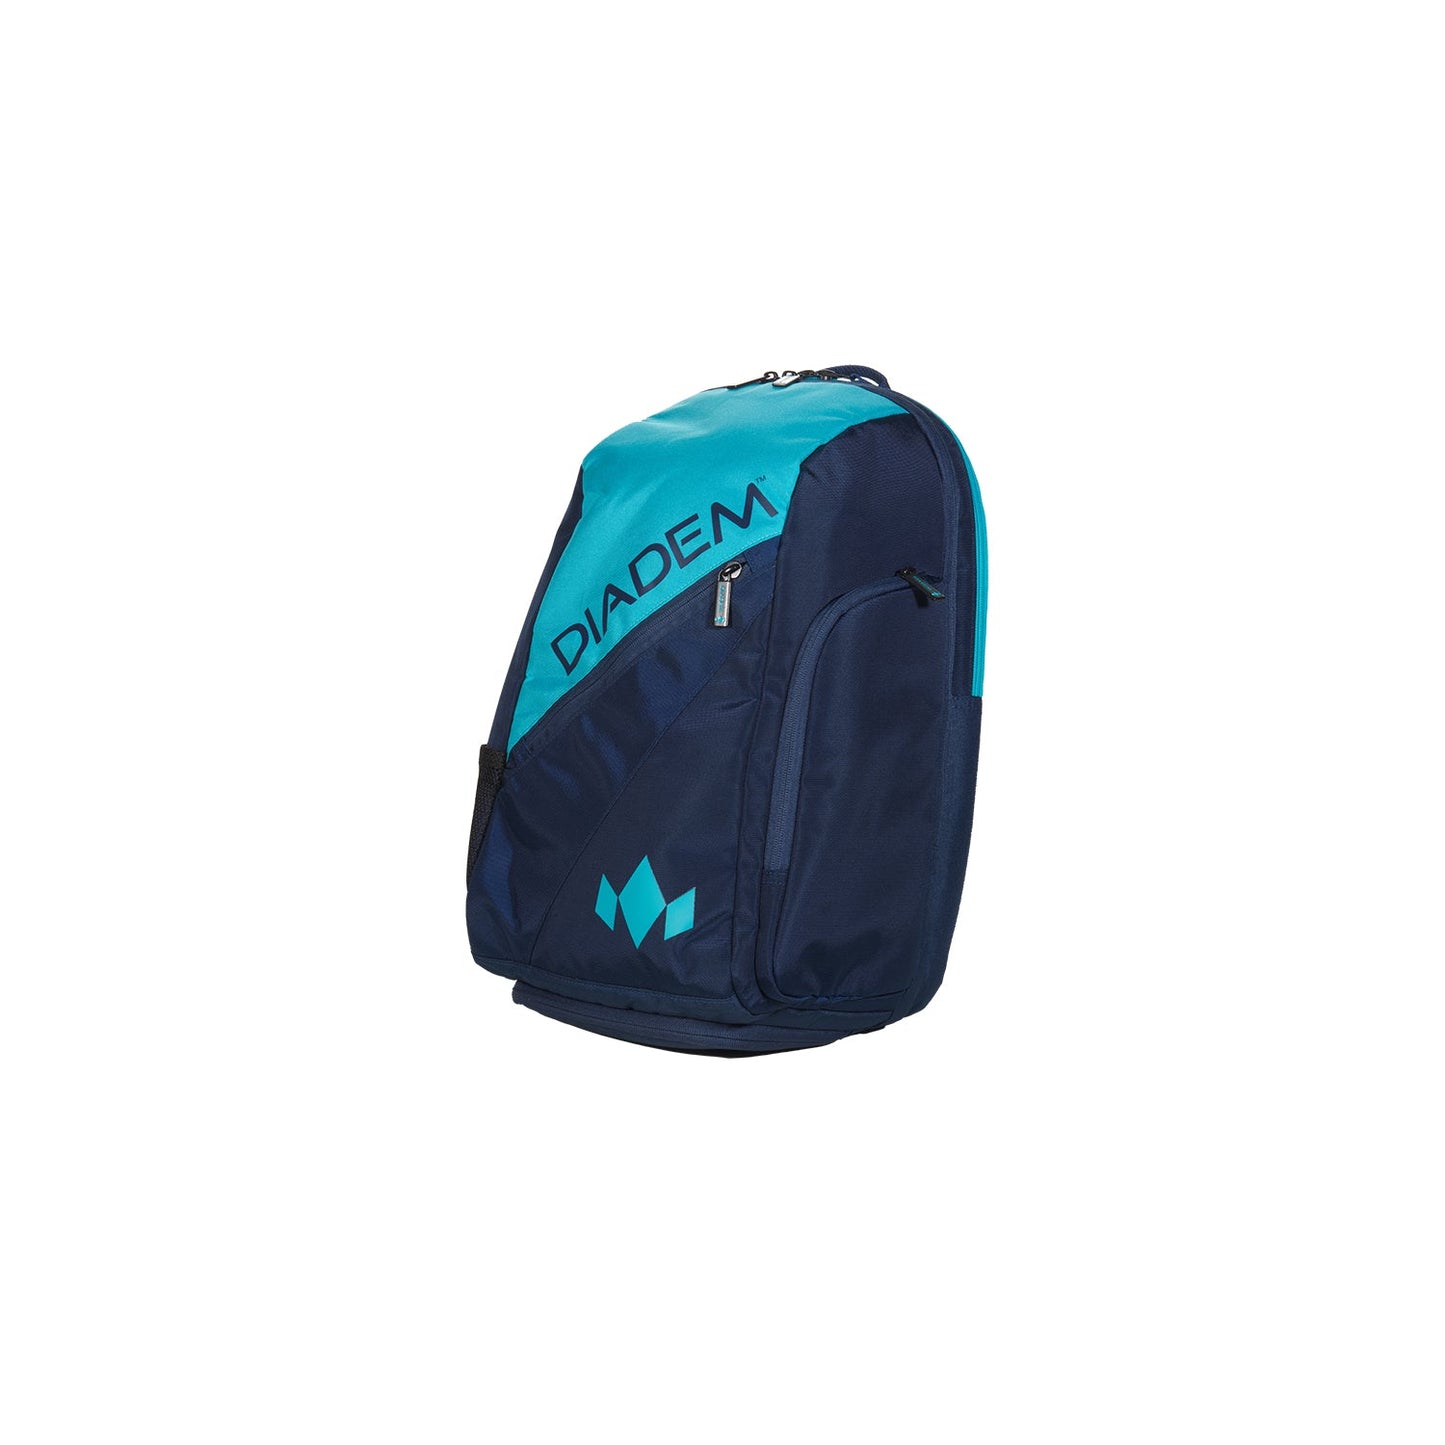 Diadem Tour Backpack Elevate Racket Bag (Teal/Navy) by Diadem Sports